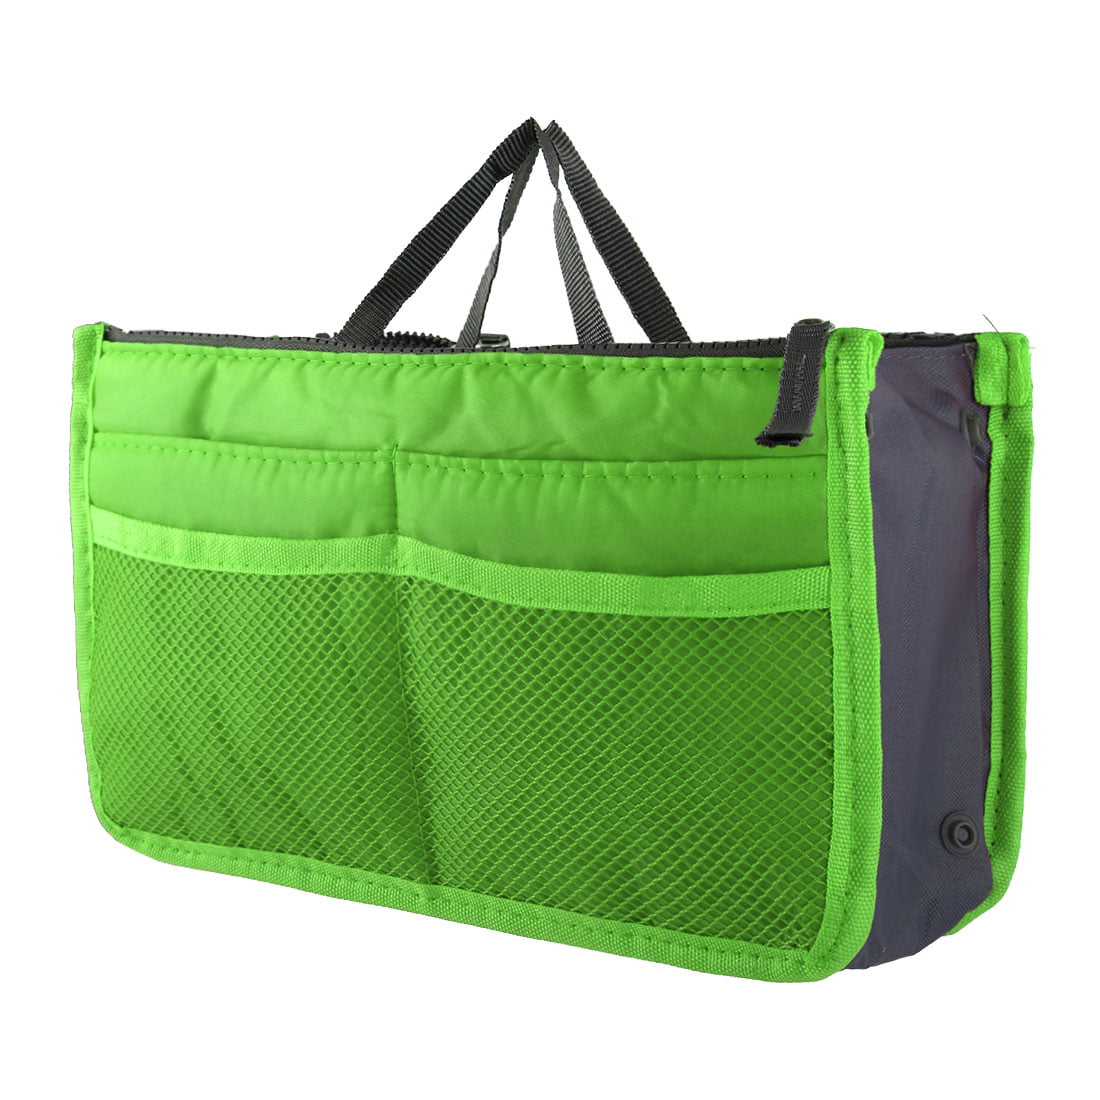 Oxford Fabric Toiletry Bag with Hanging Hook for Vacation，Gym,Green | Walmart Canada